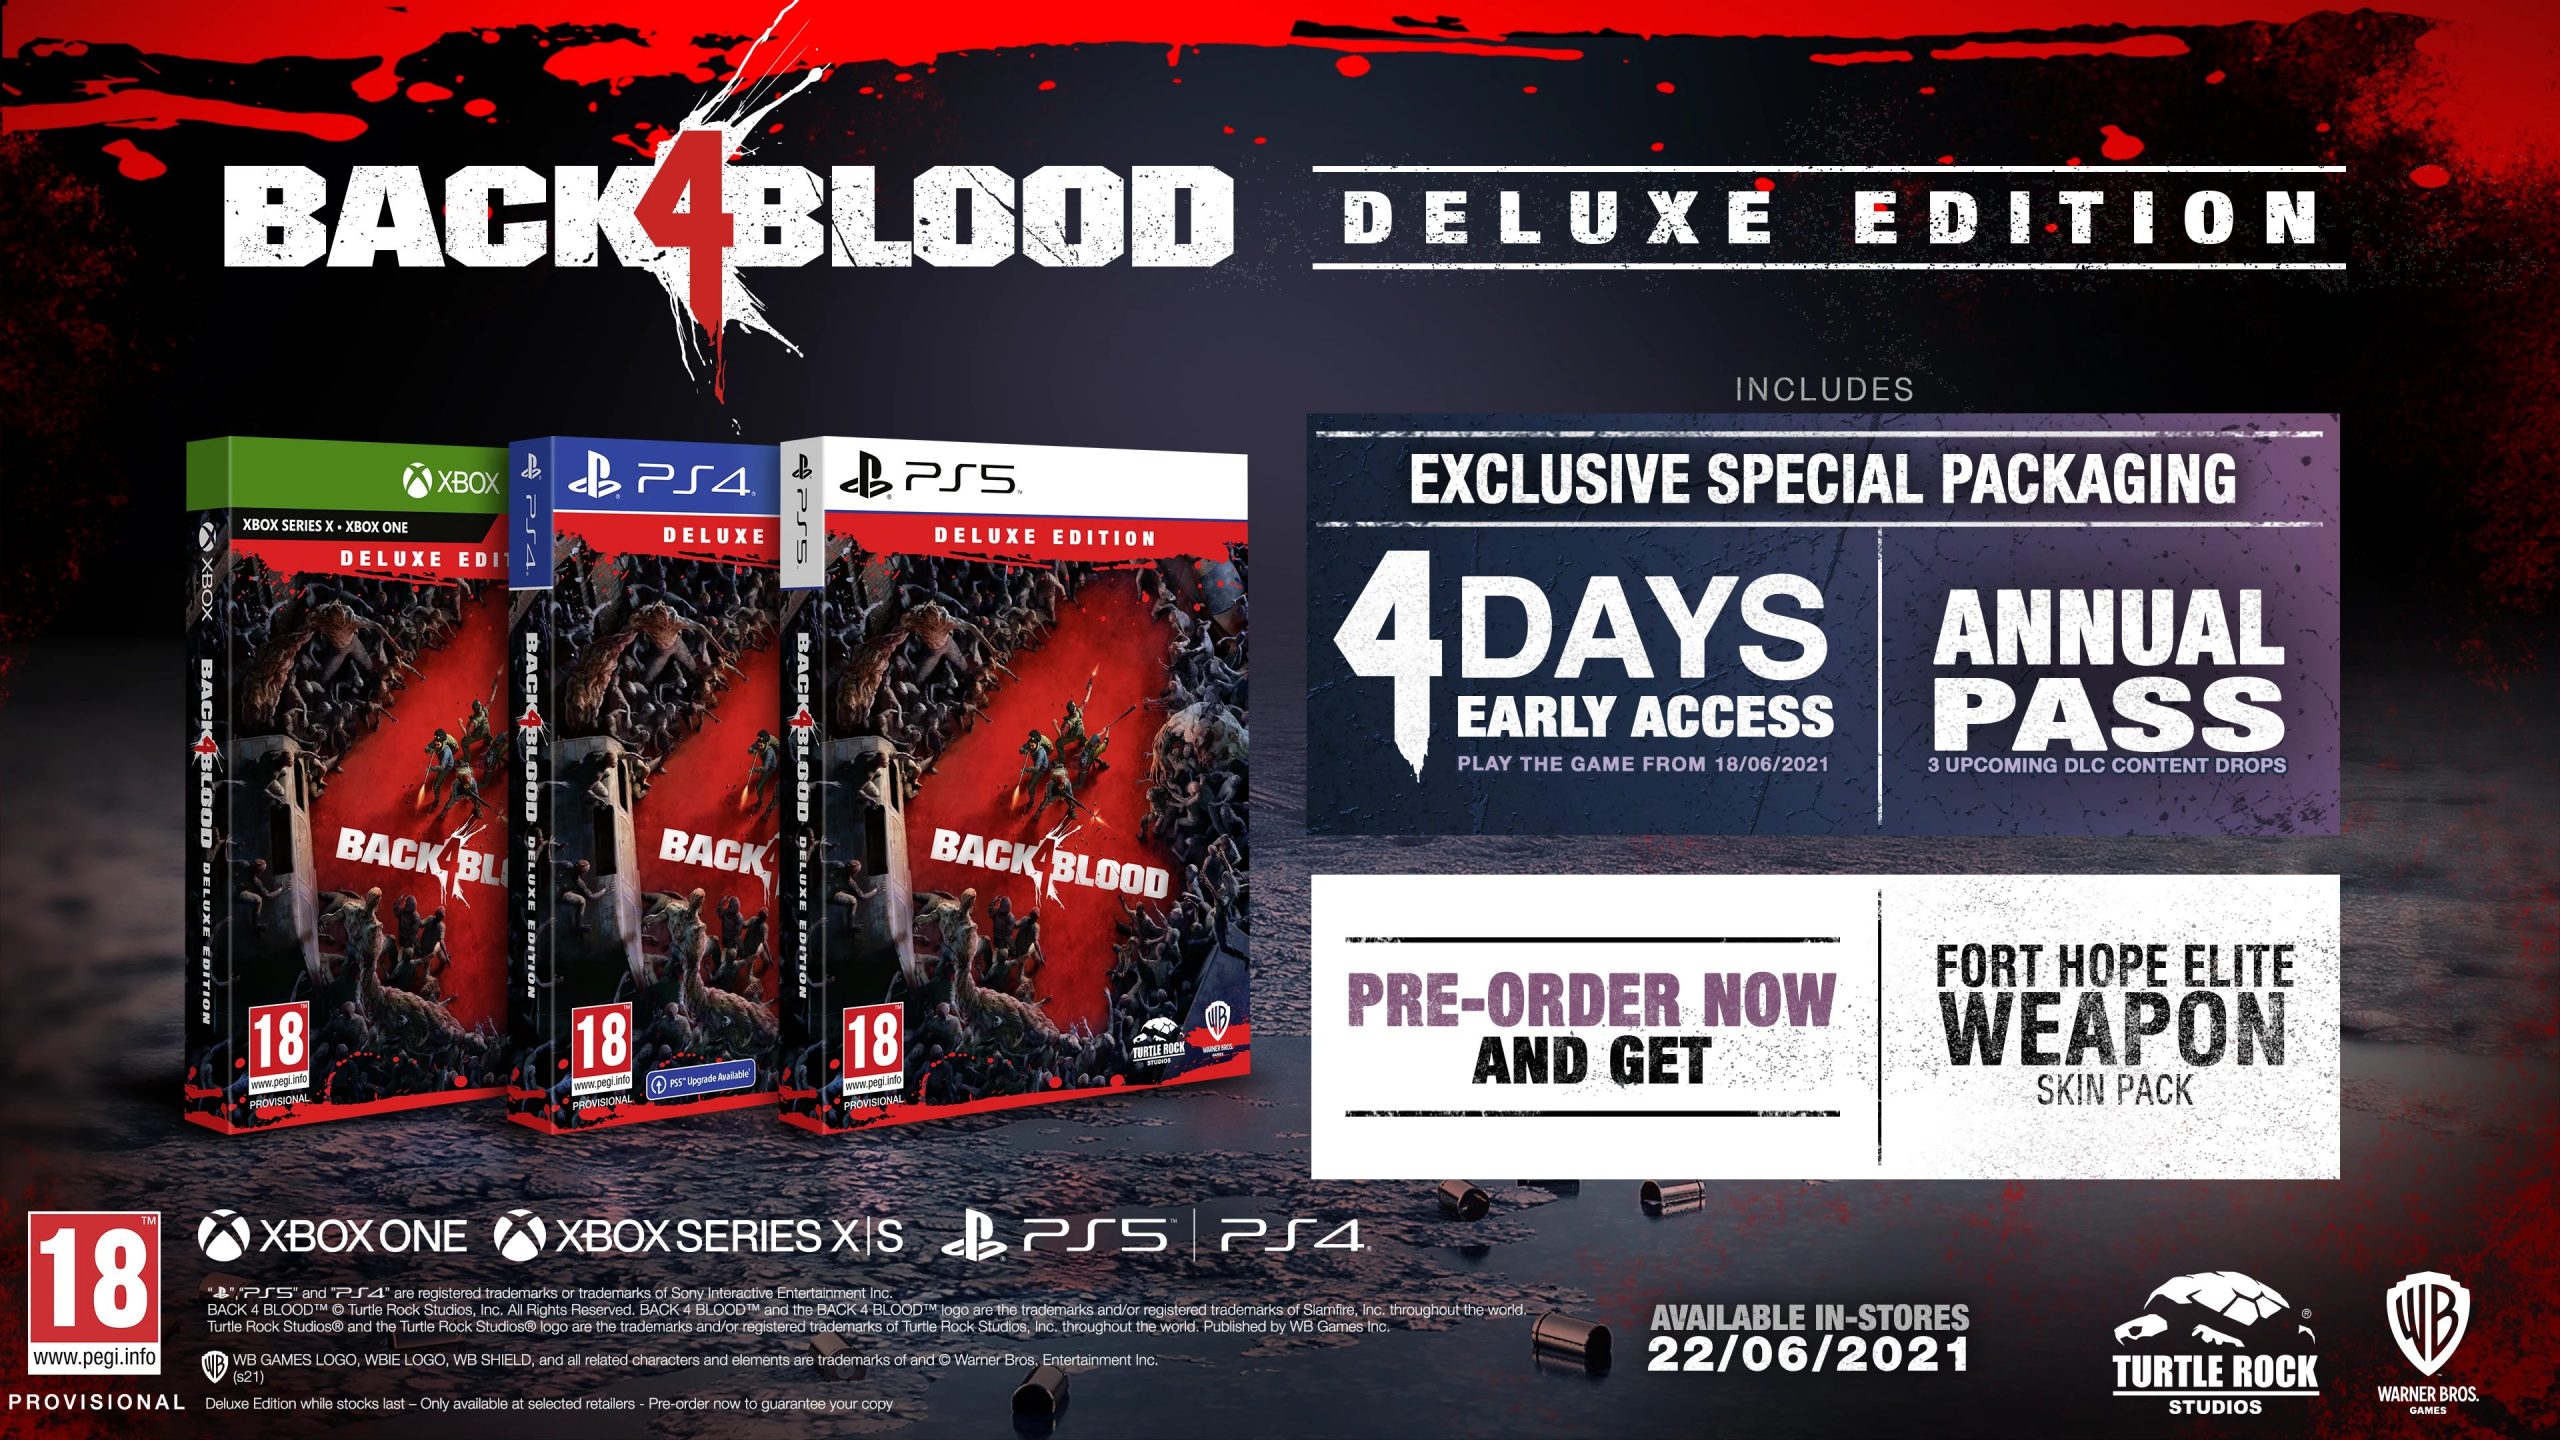 Buy Back 4 Blood Ultimate Edition Digital Content